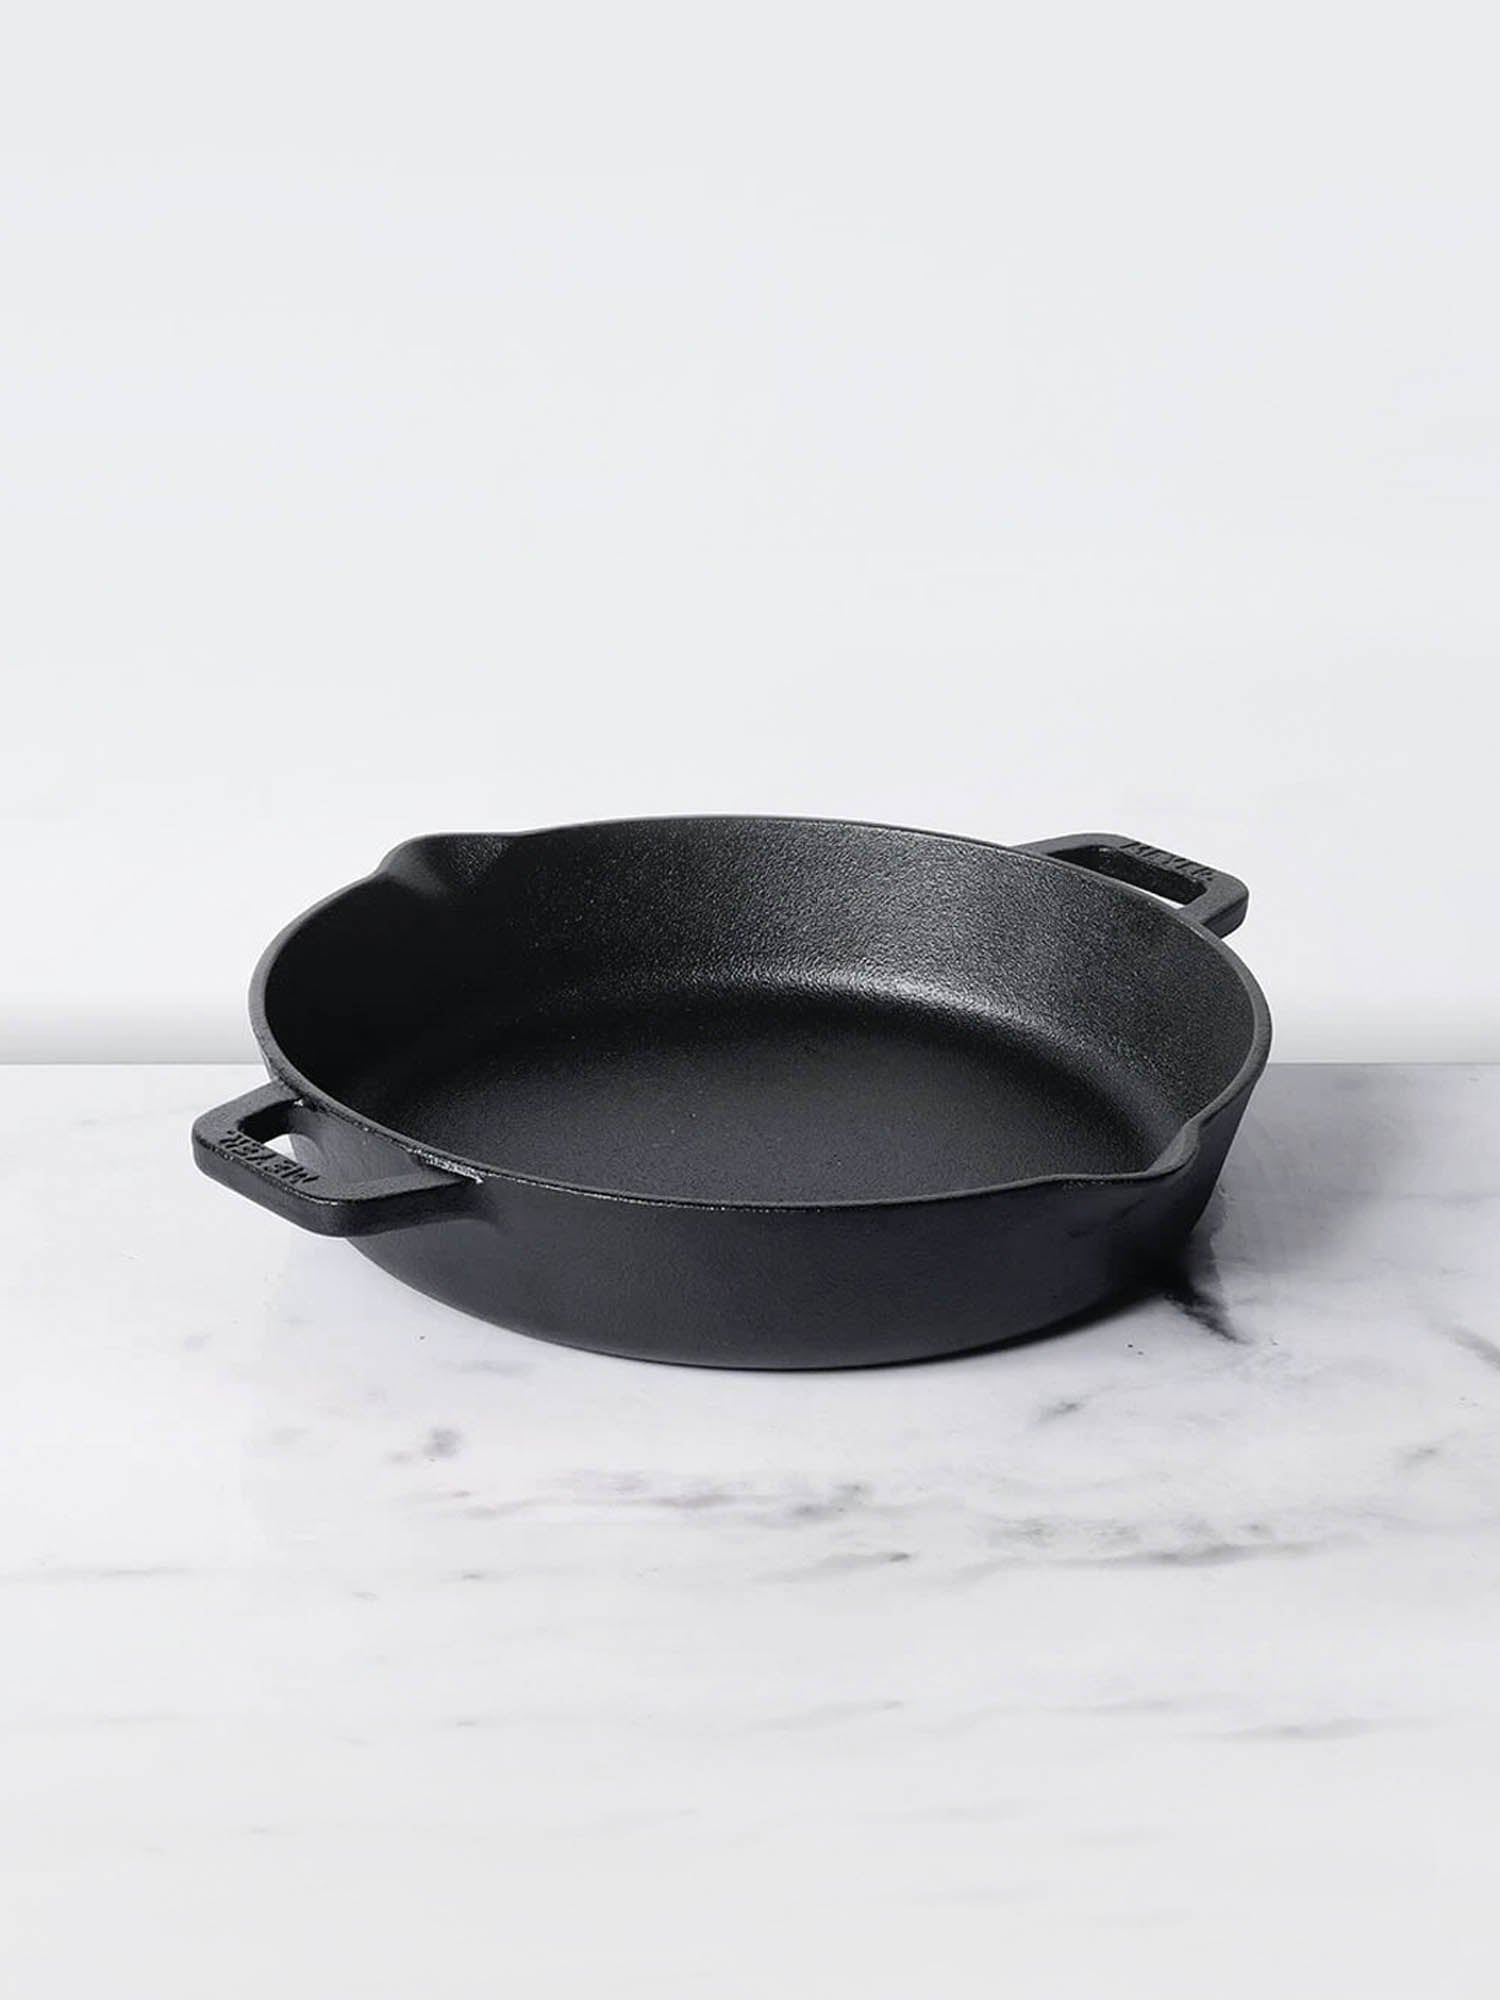 Meyer 24cm Cast Iron Skillet with 2 side Handle